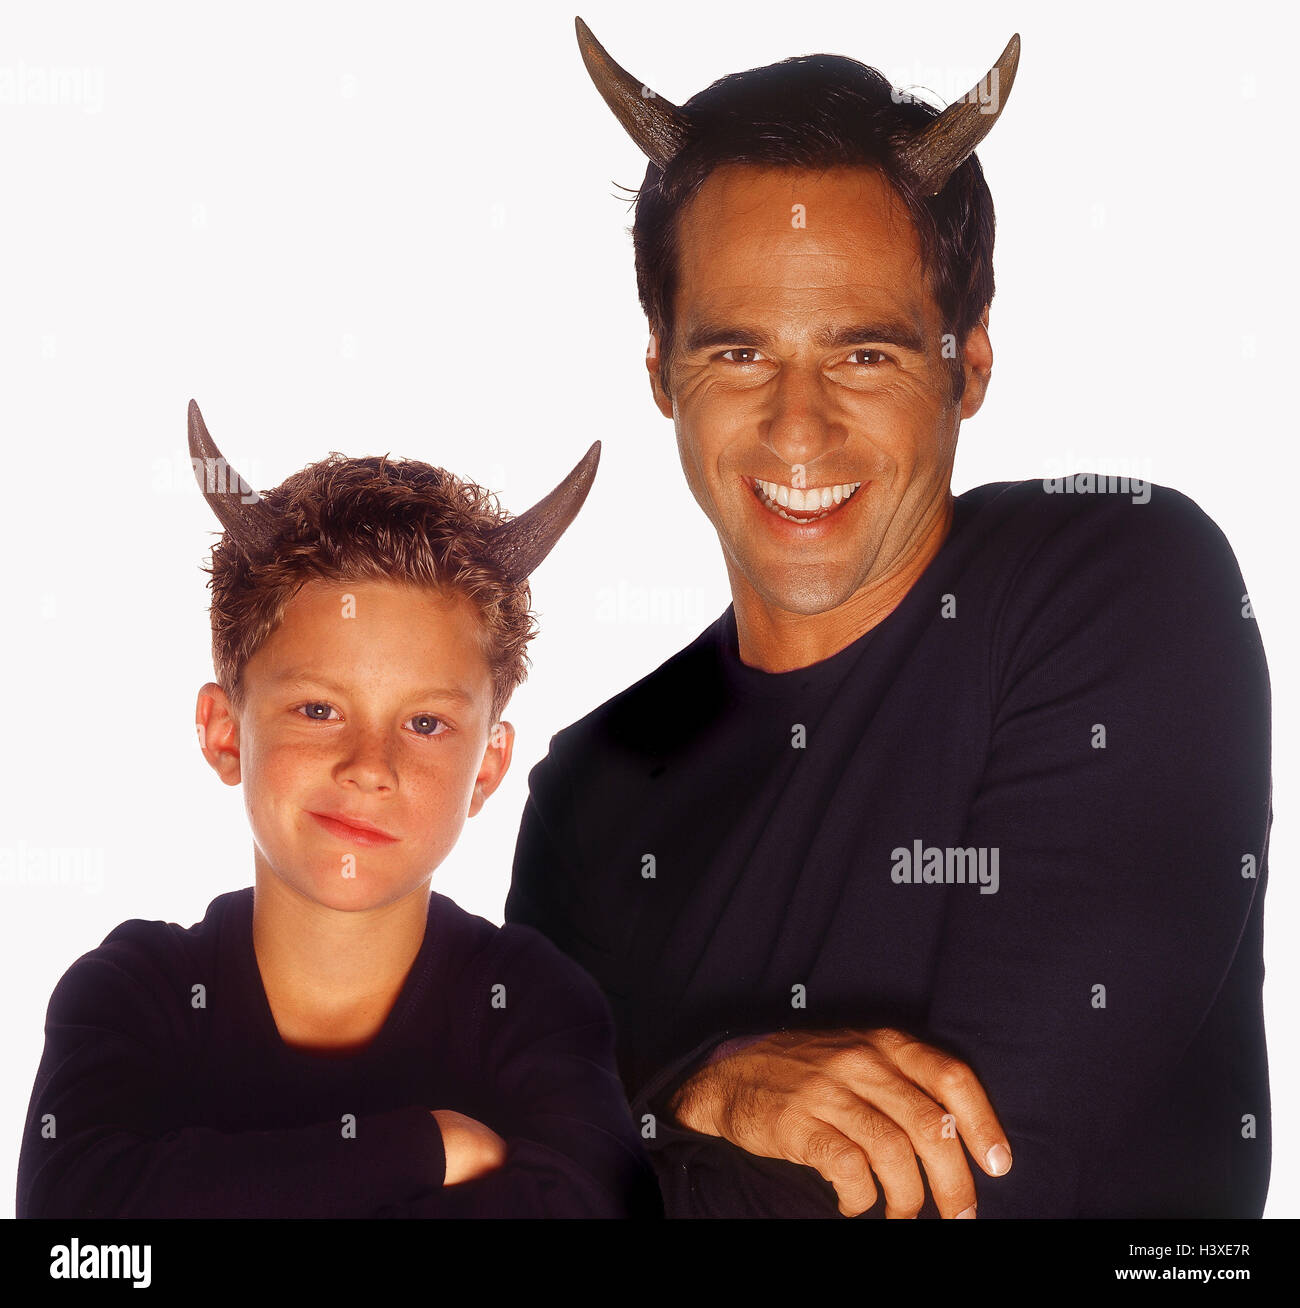 Man, boy, lining, devil, smile, portrait, concepts, father, son, child, costume, Satan, horns, unbelief, sin, diabolically, nastily, well, contrast, cut out, studio, Stock Photo